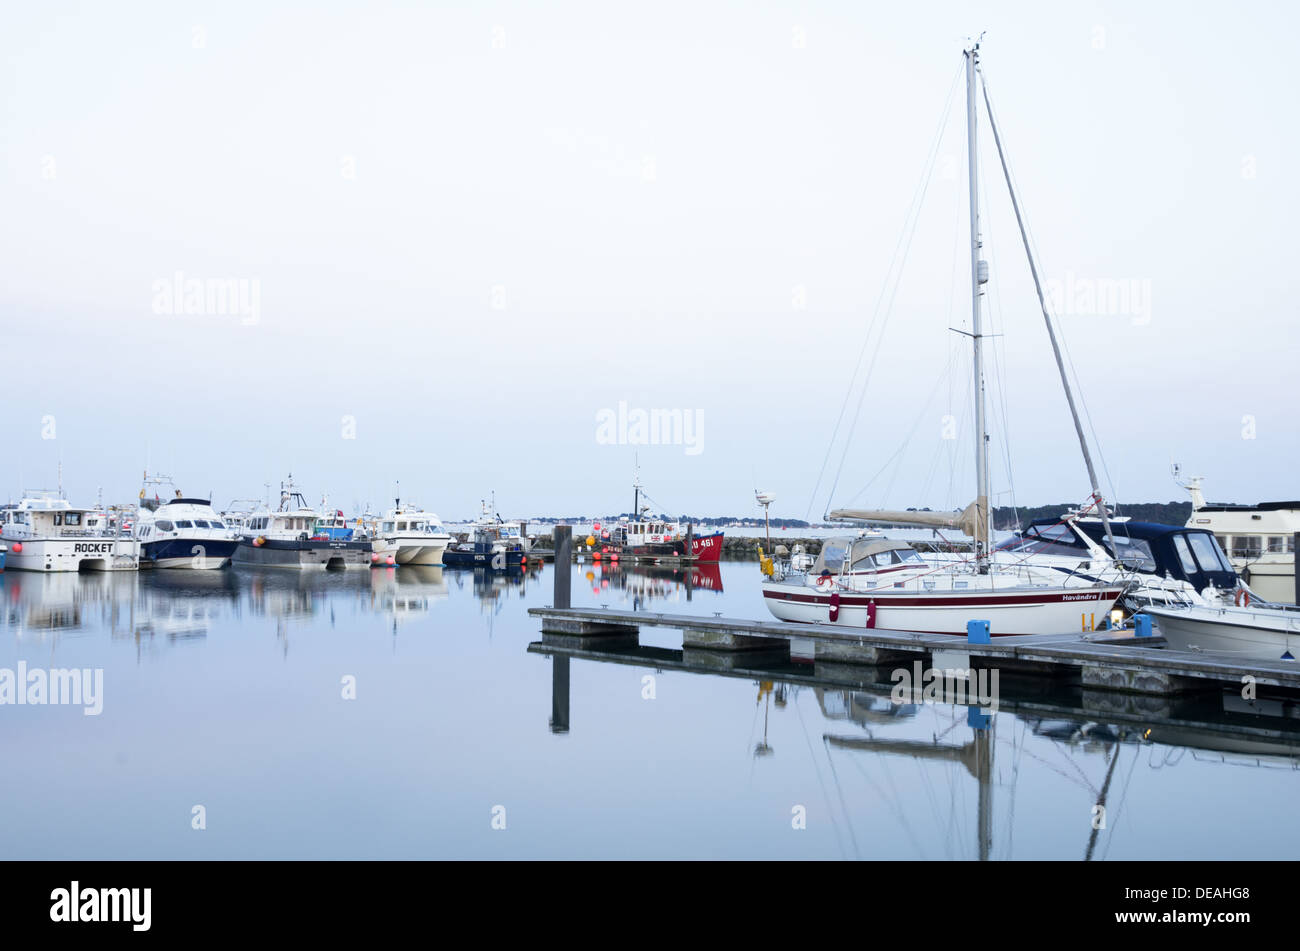 A view of Poole harbour with many boats and yachts on a calm late summer evening with perfect reflections in still water. Stock Photo